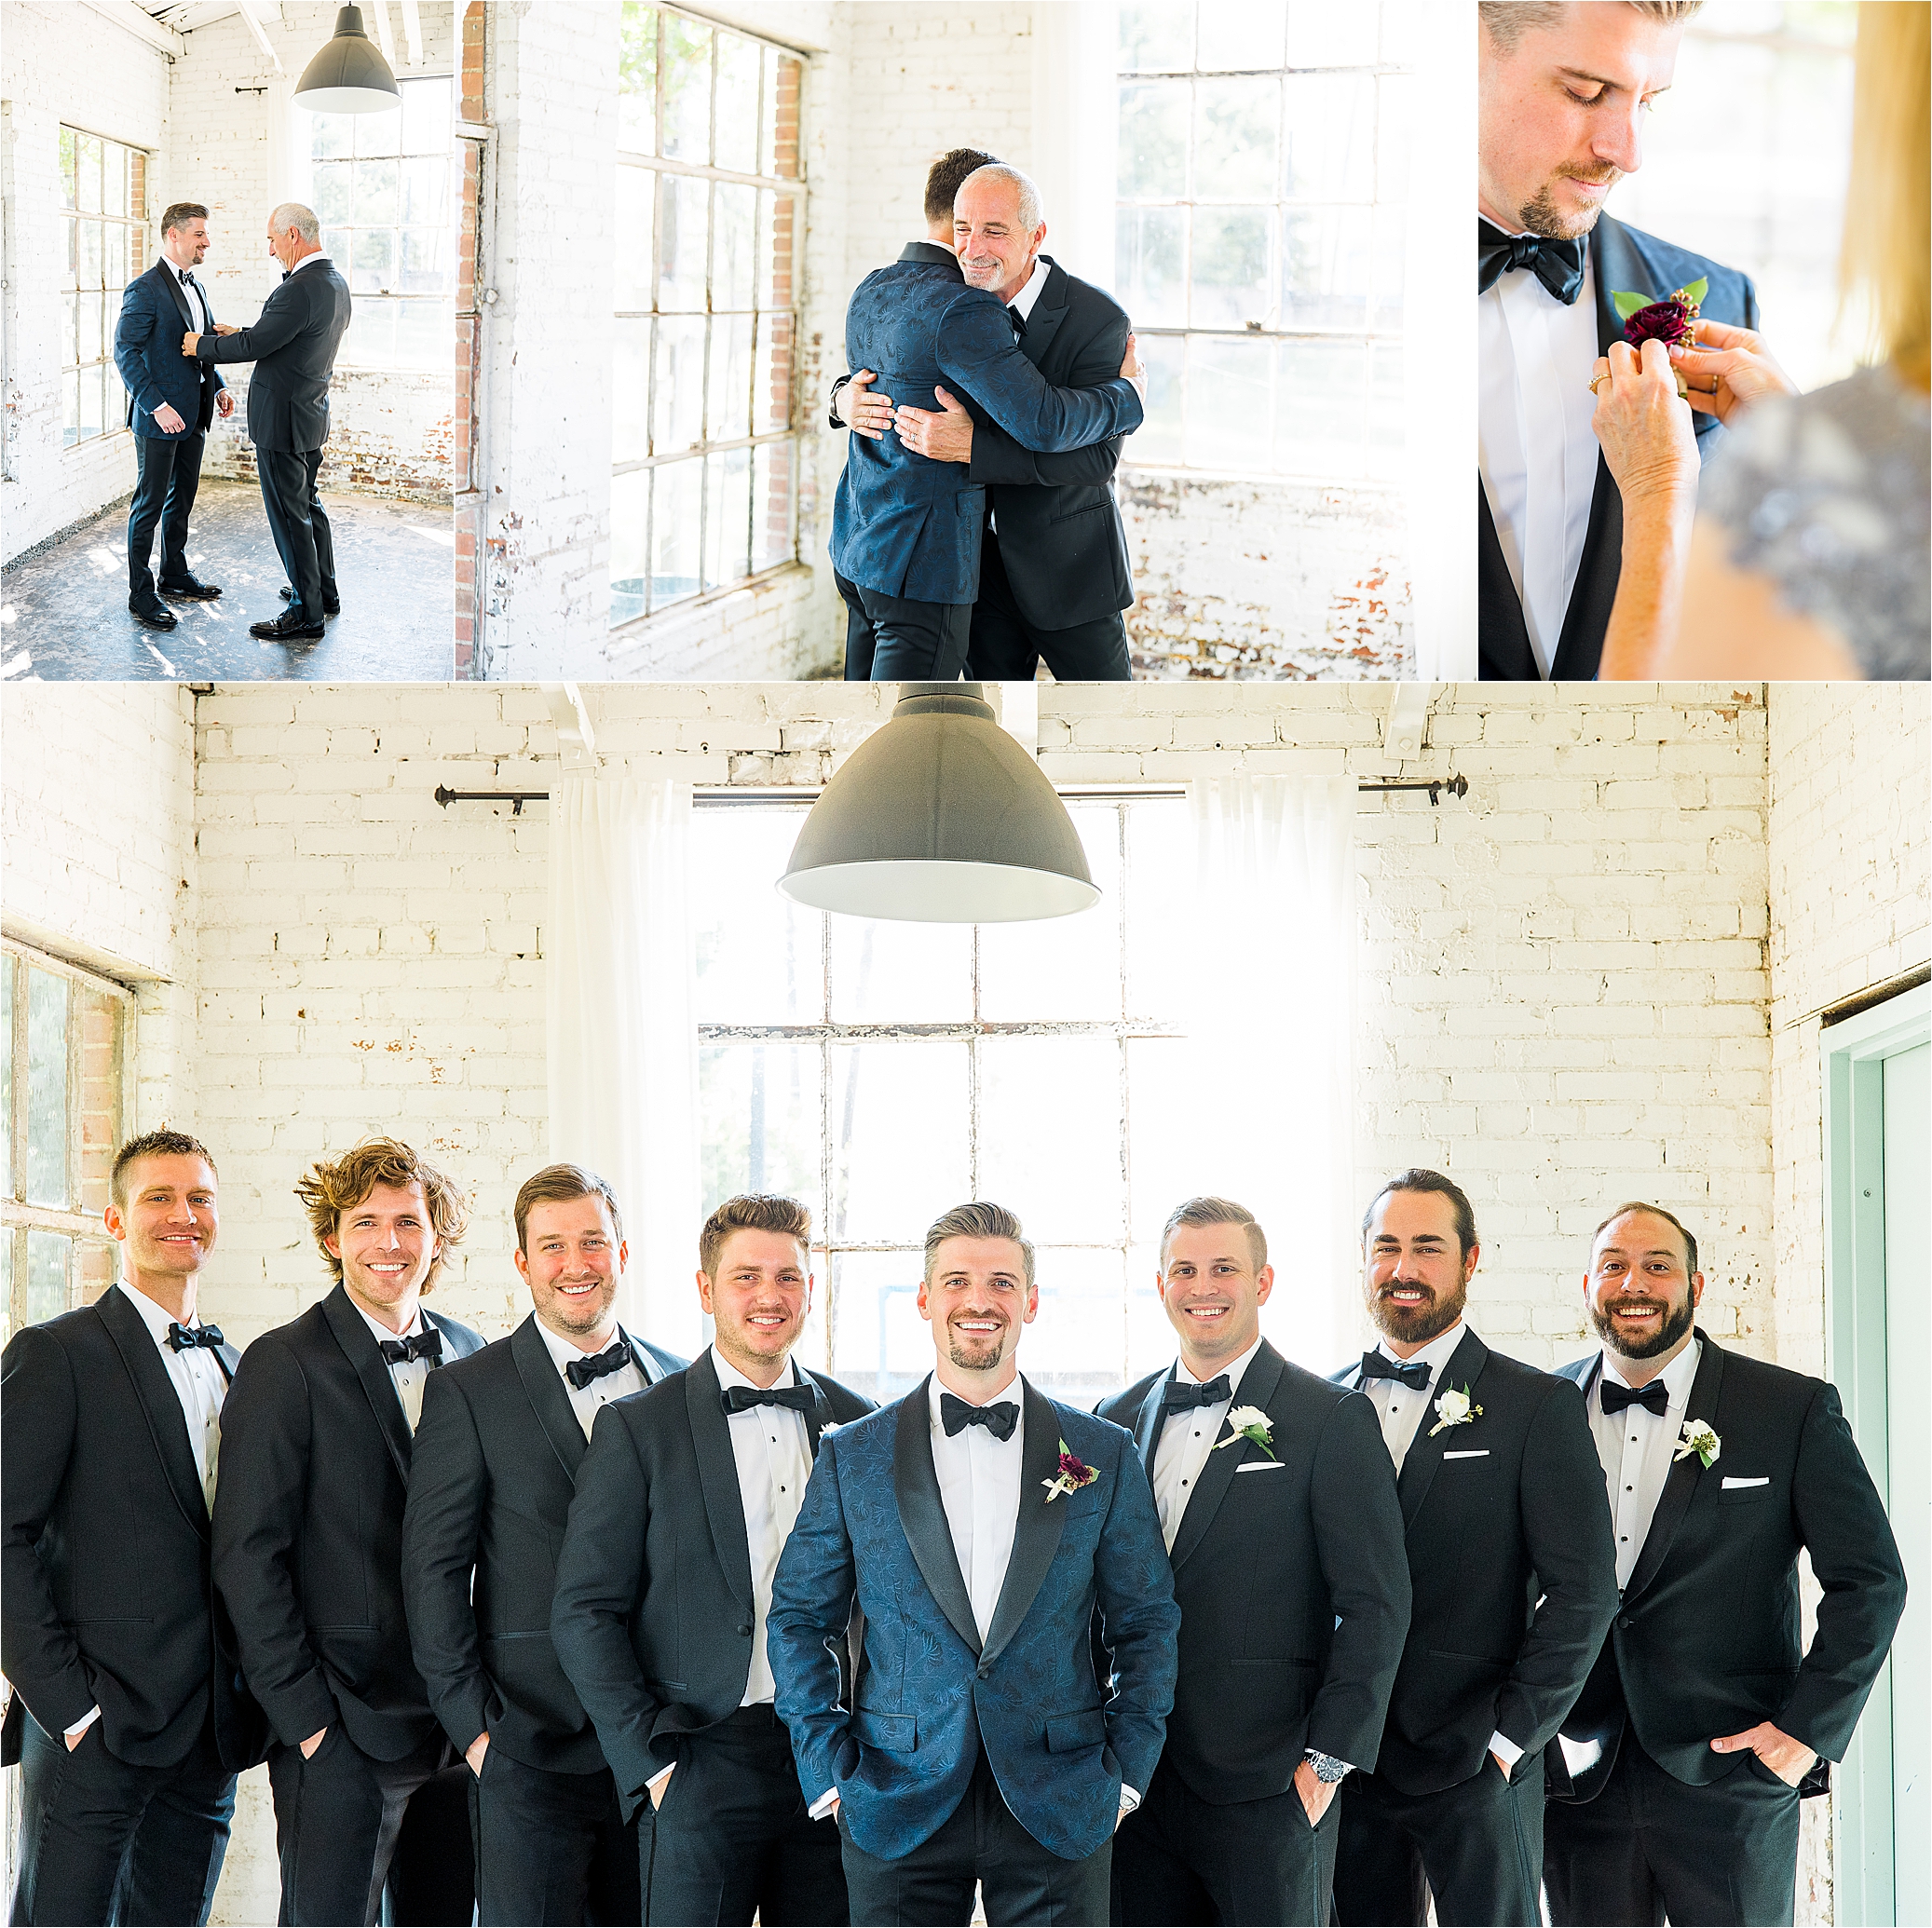 A groom hugs his dad and poses with his groomsmen inside a bright, white brick walled building at Hickory Street Annex with Wedding photographer Jillian Hogan 